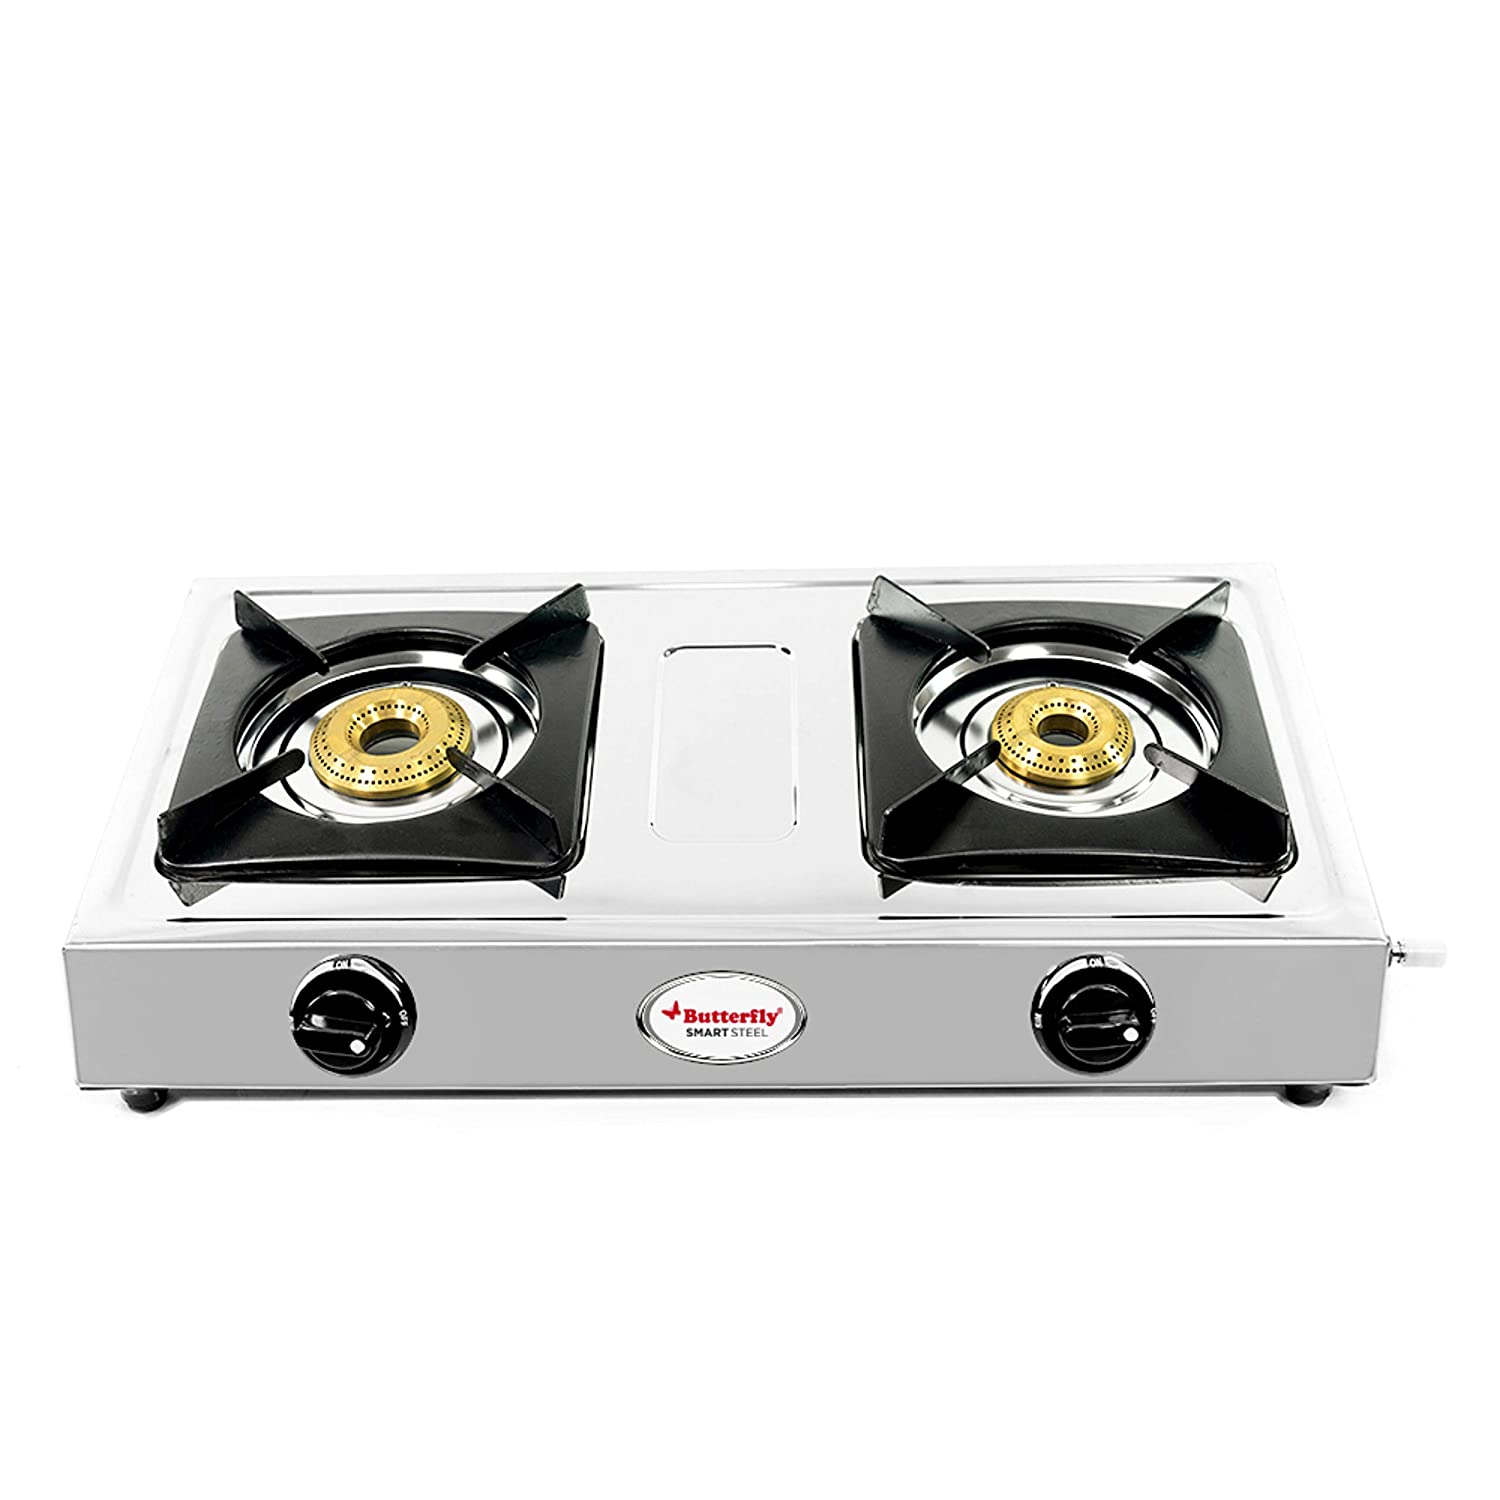 Butterfly Stainless Steel 2 Burner Gas Stove